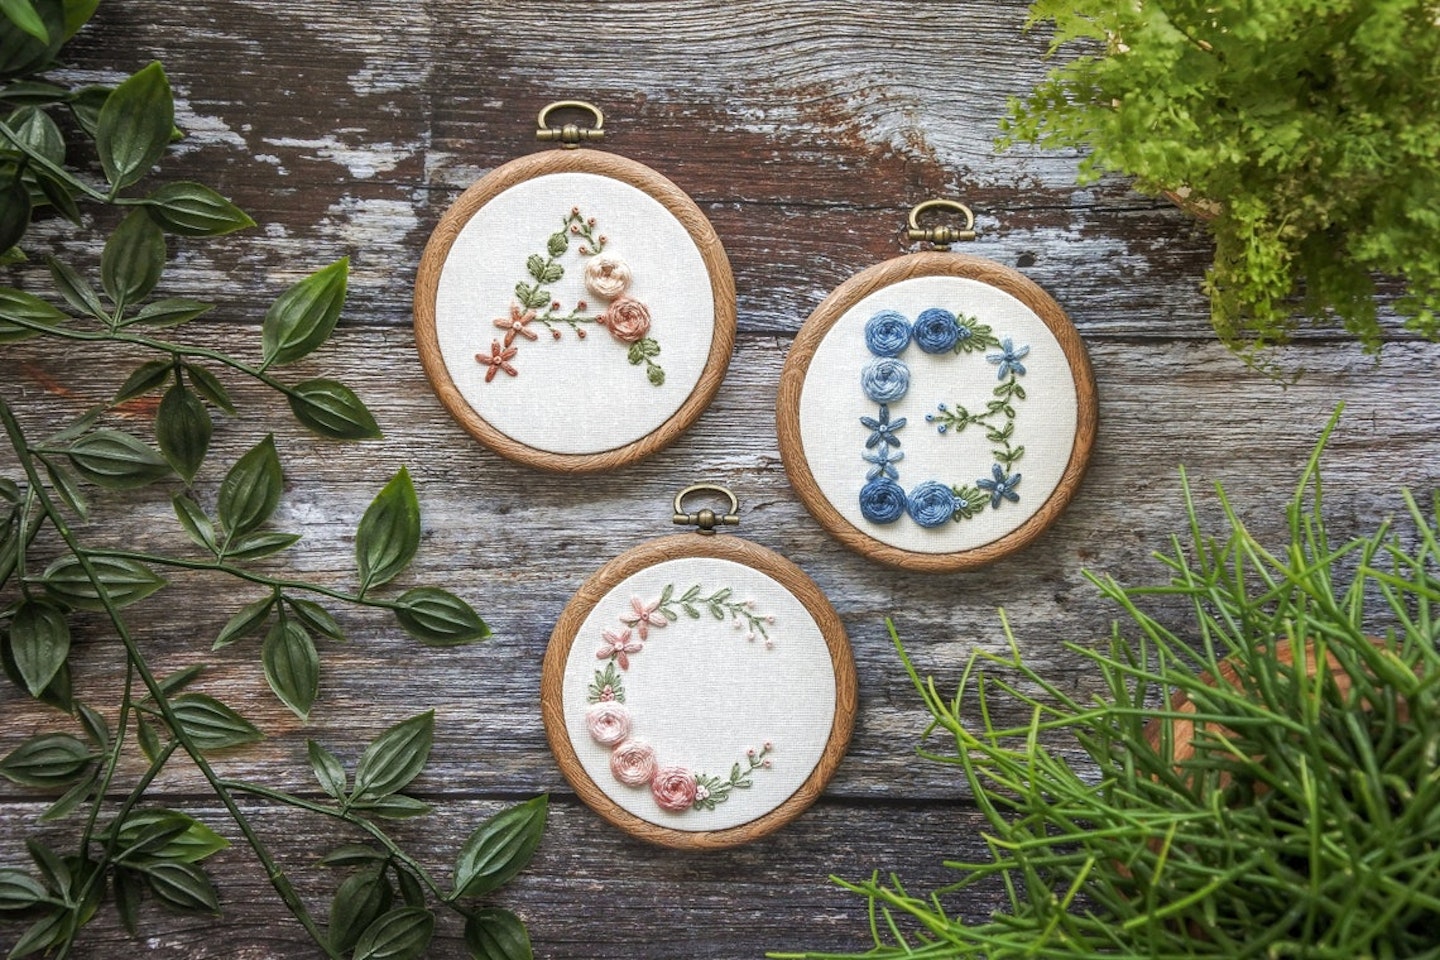 Etsy,Personalised Hand Embroidery Floral Hoop Art, From £22.99